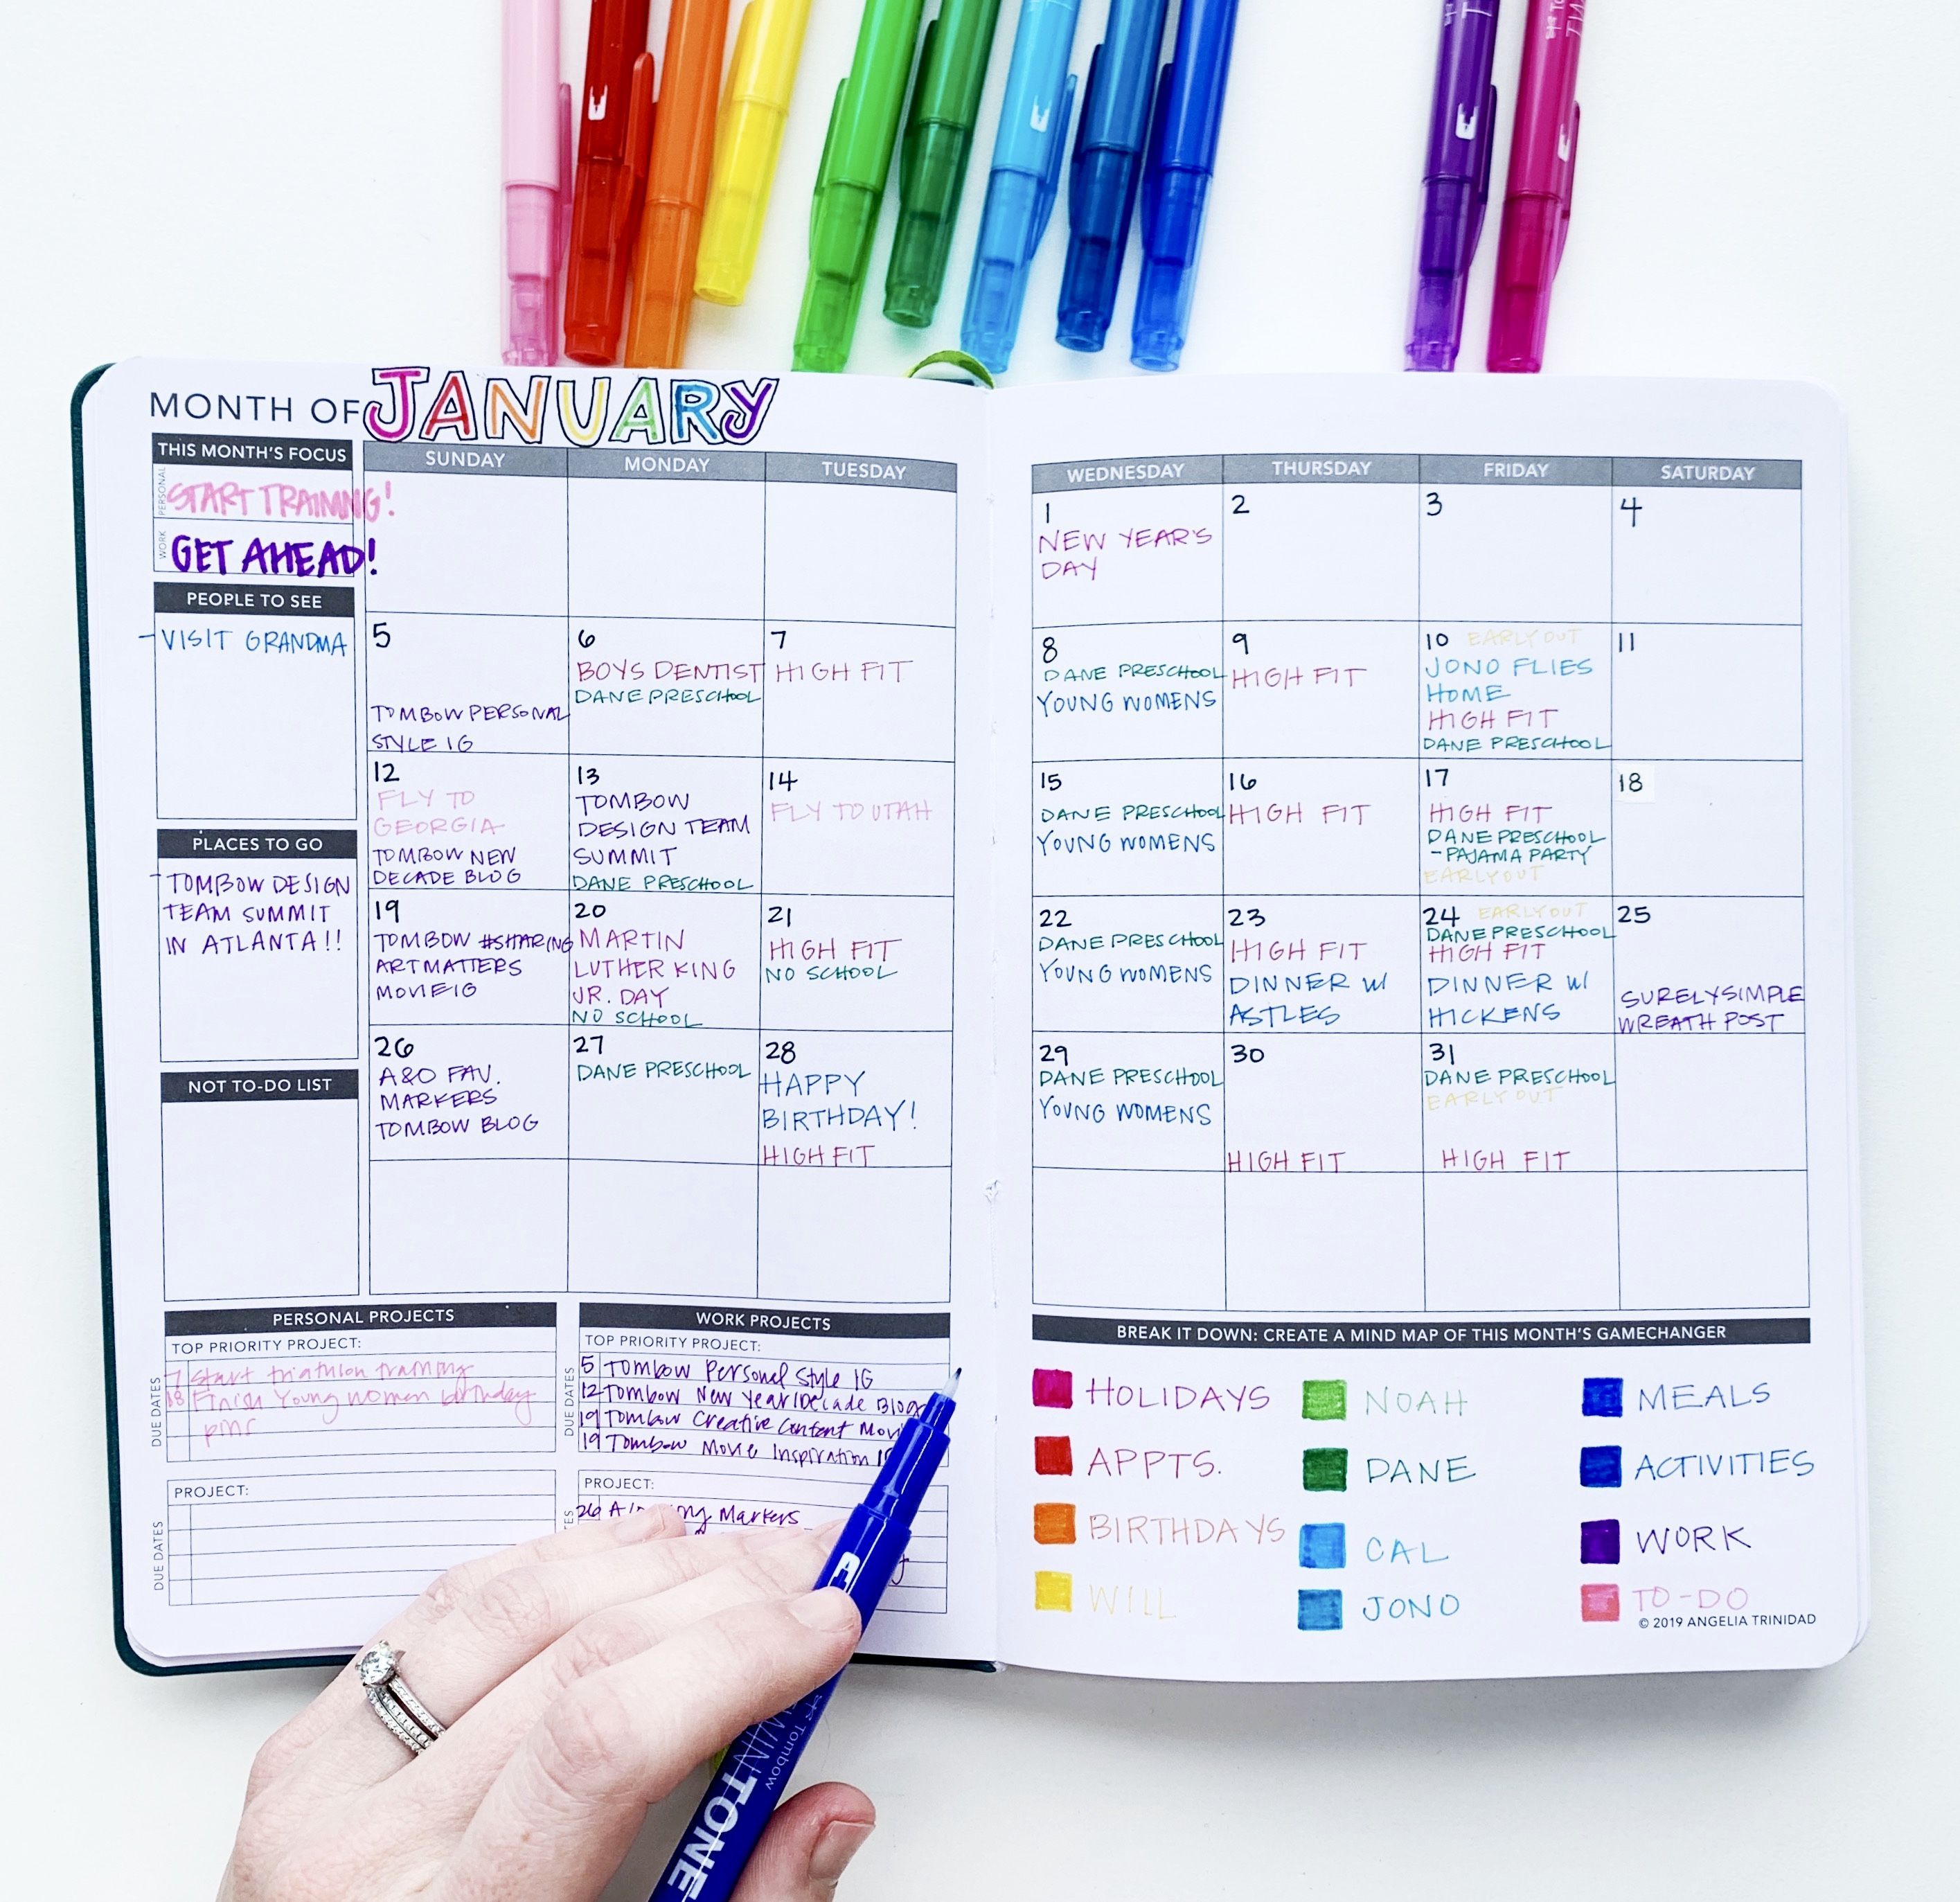 Five Ways to Personalize Your Planner - Tombow USA Blog - Five Ways to Personalize Your Planner - Tombow USA Blog -   17 fitness Planner notebooks ideas